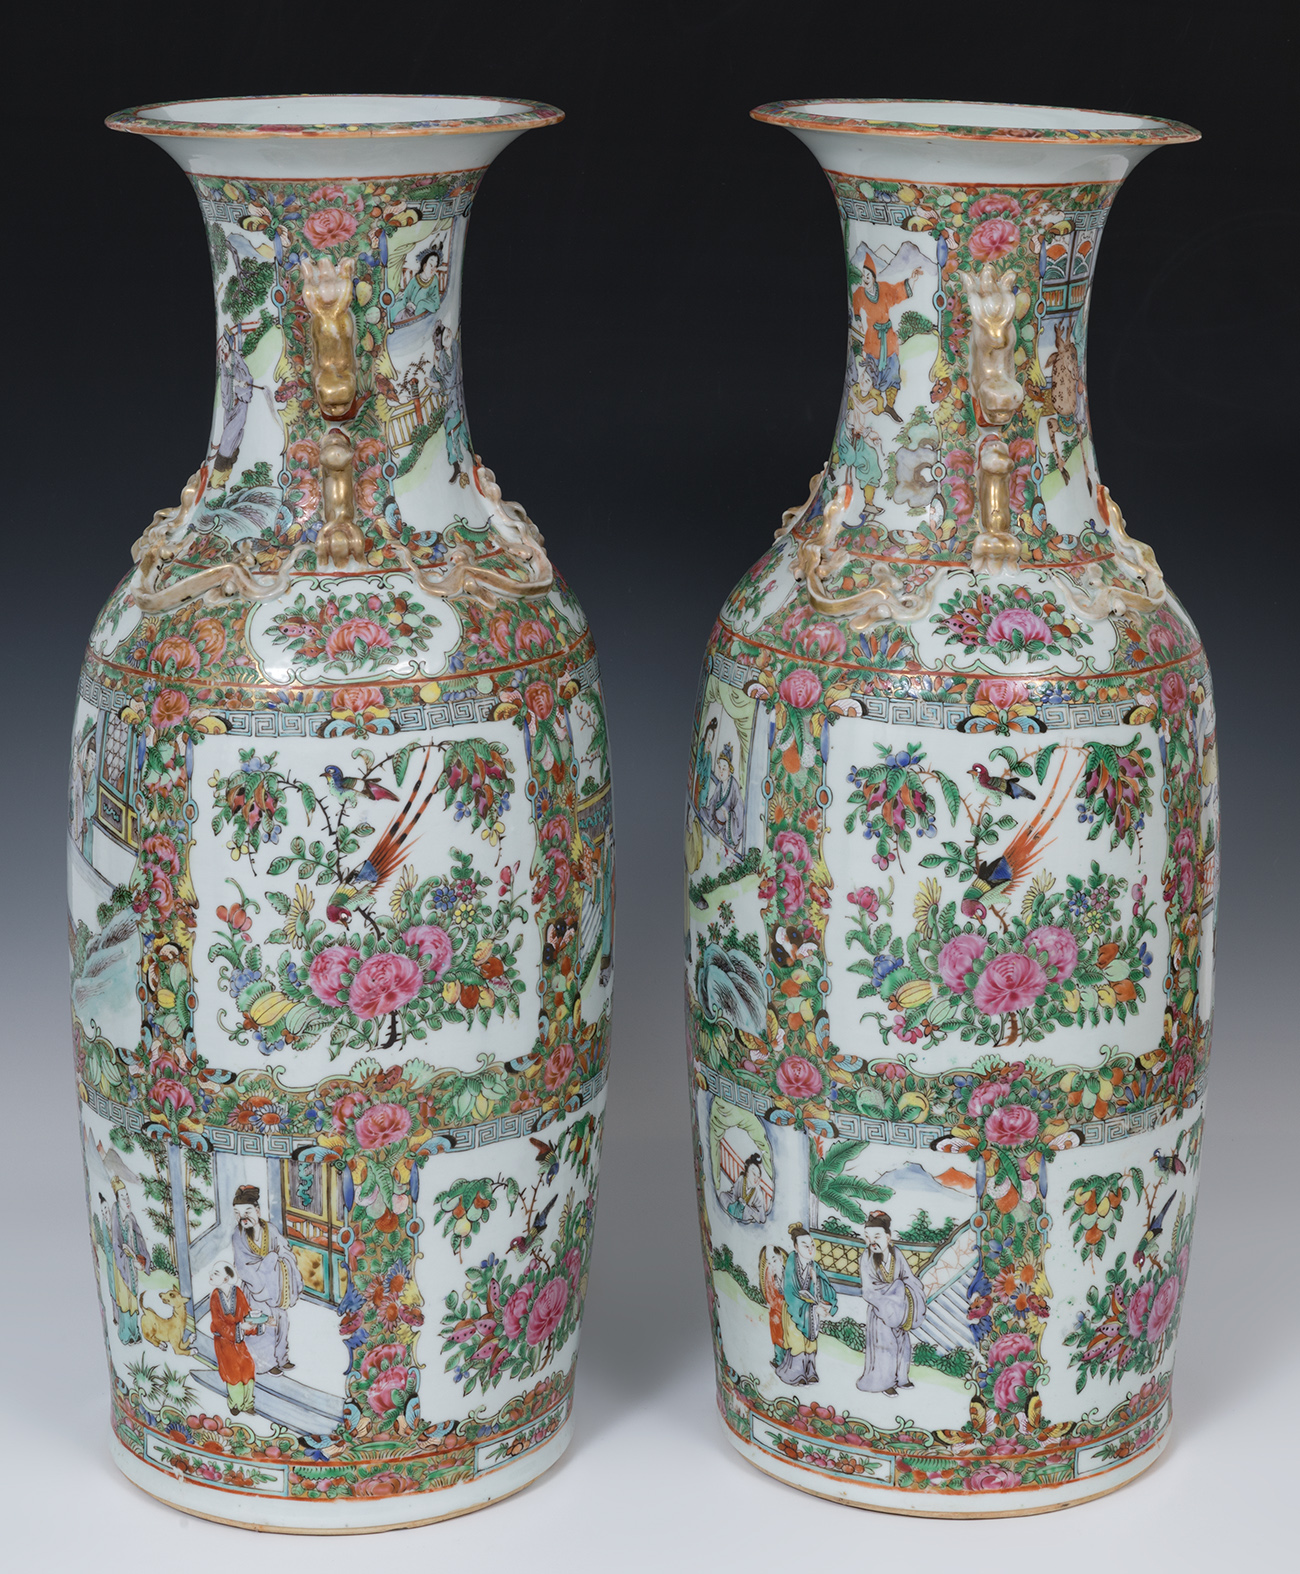 Pair of vases after models of the Green Family; Canton, China 19th century.Enamelled porcelain.The - Image 4 of 7